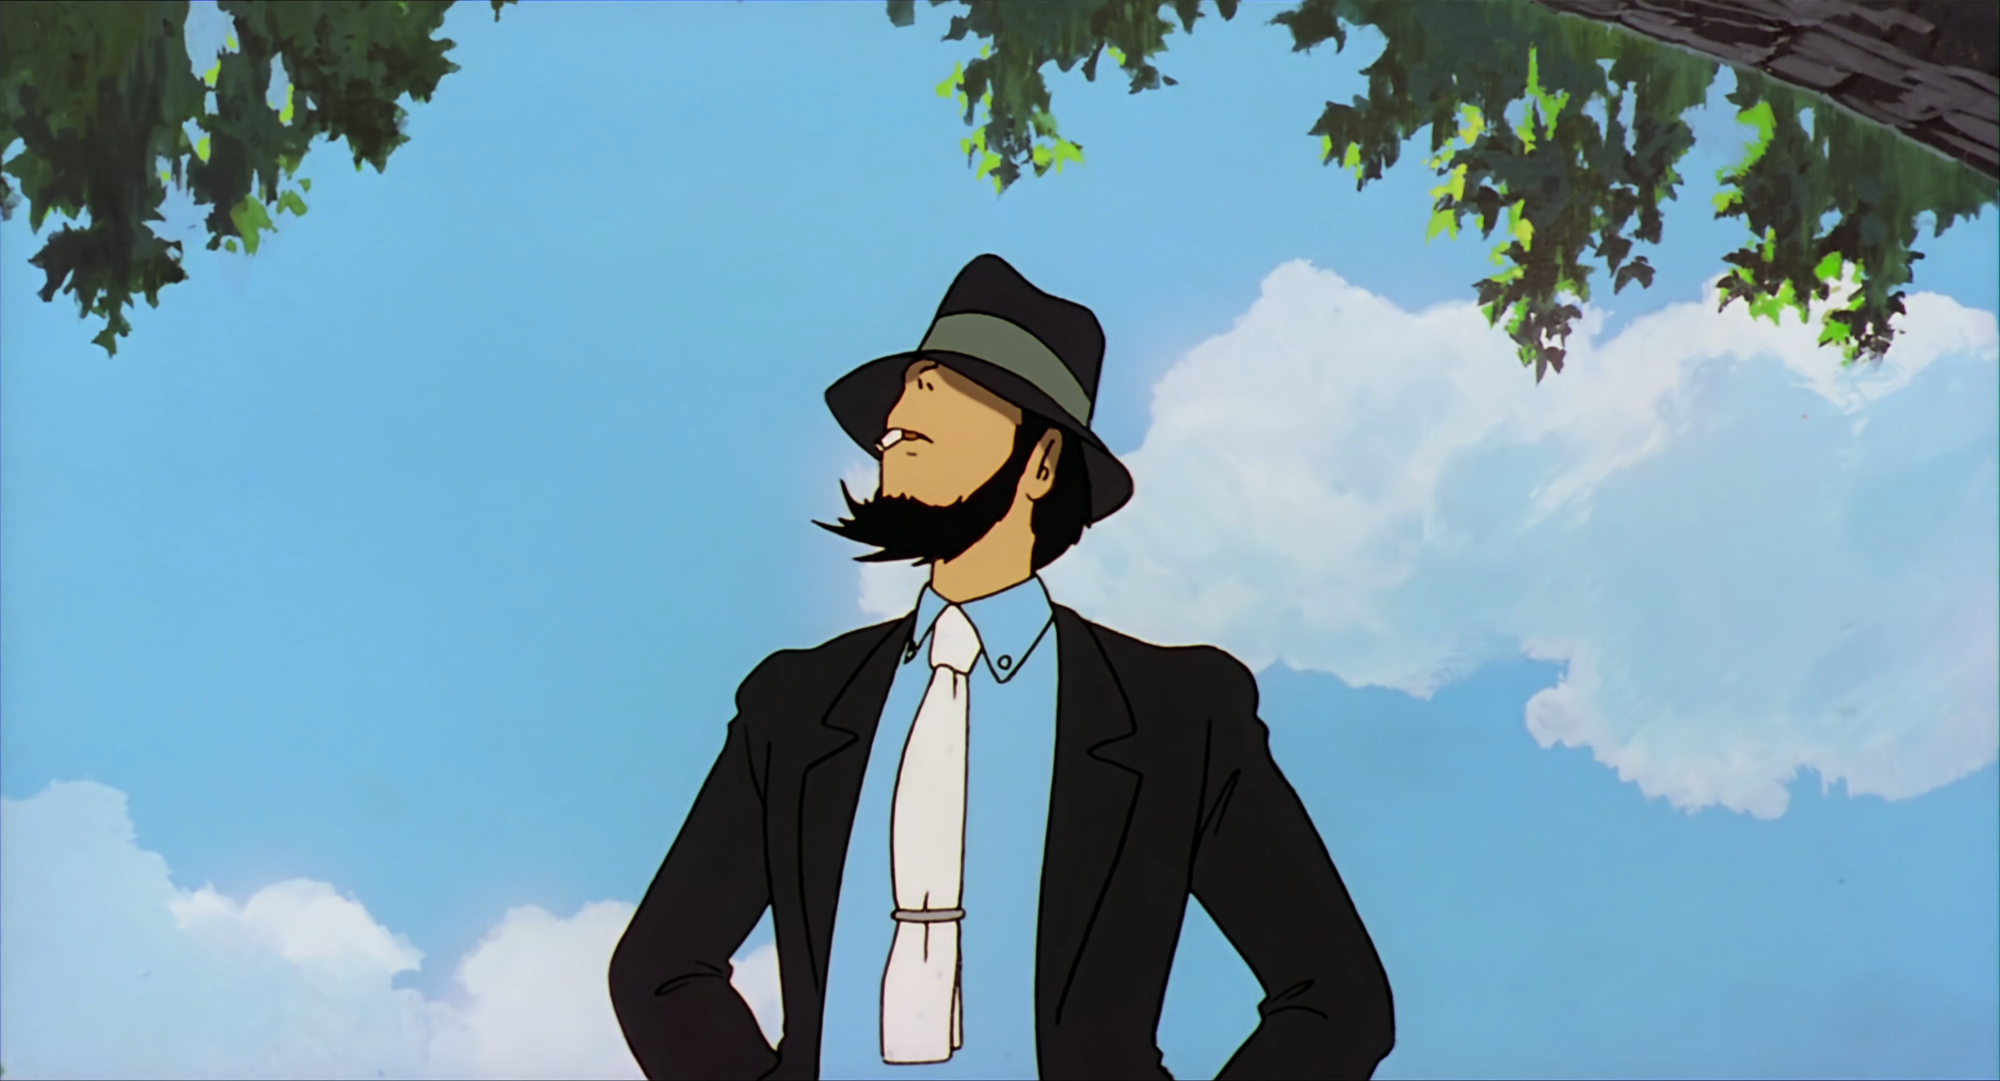 Lupin_Still_12.40.08.png